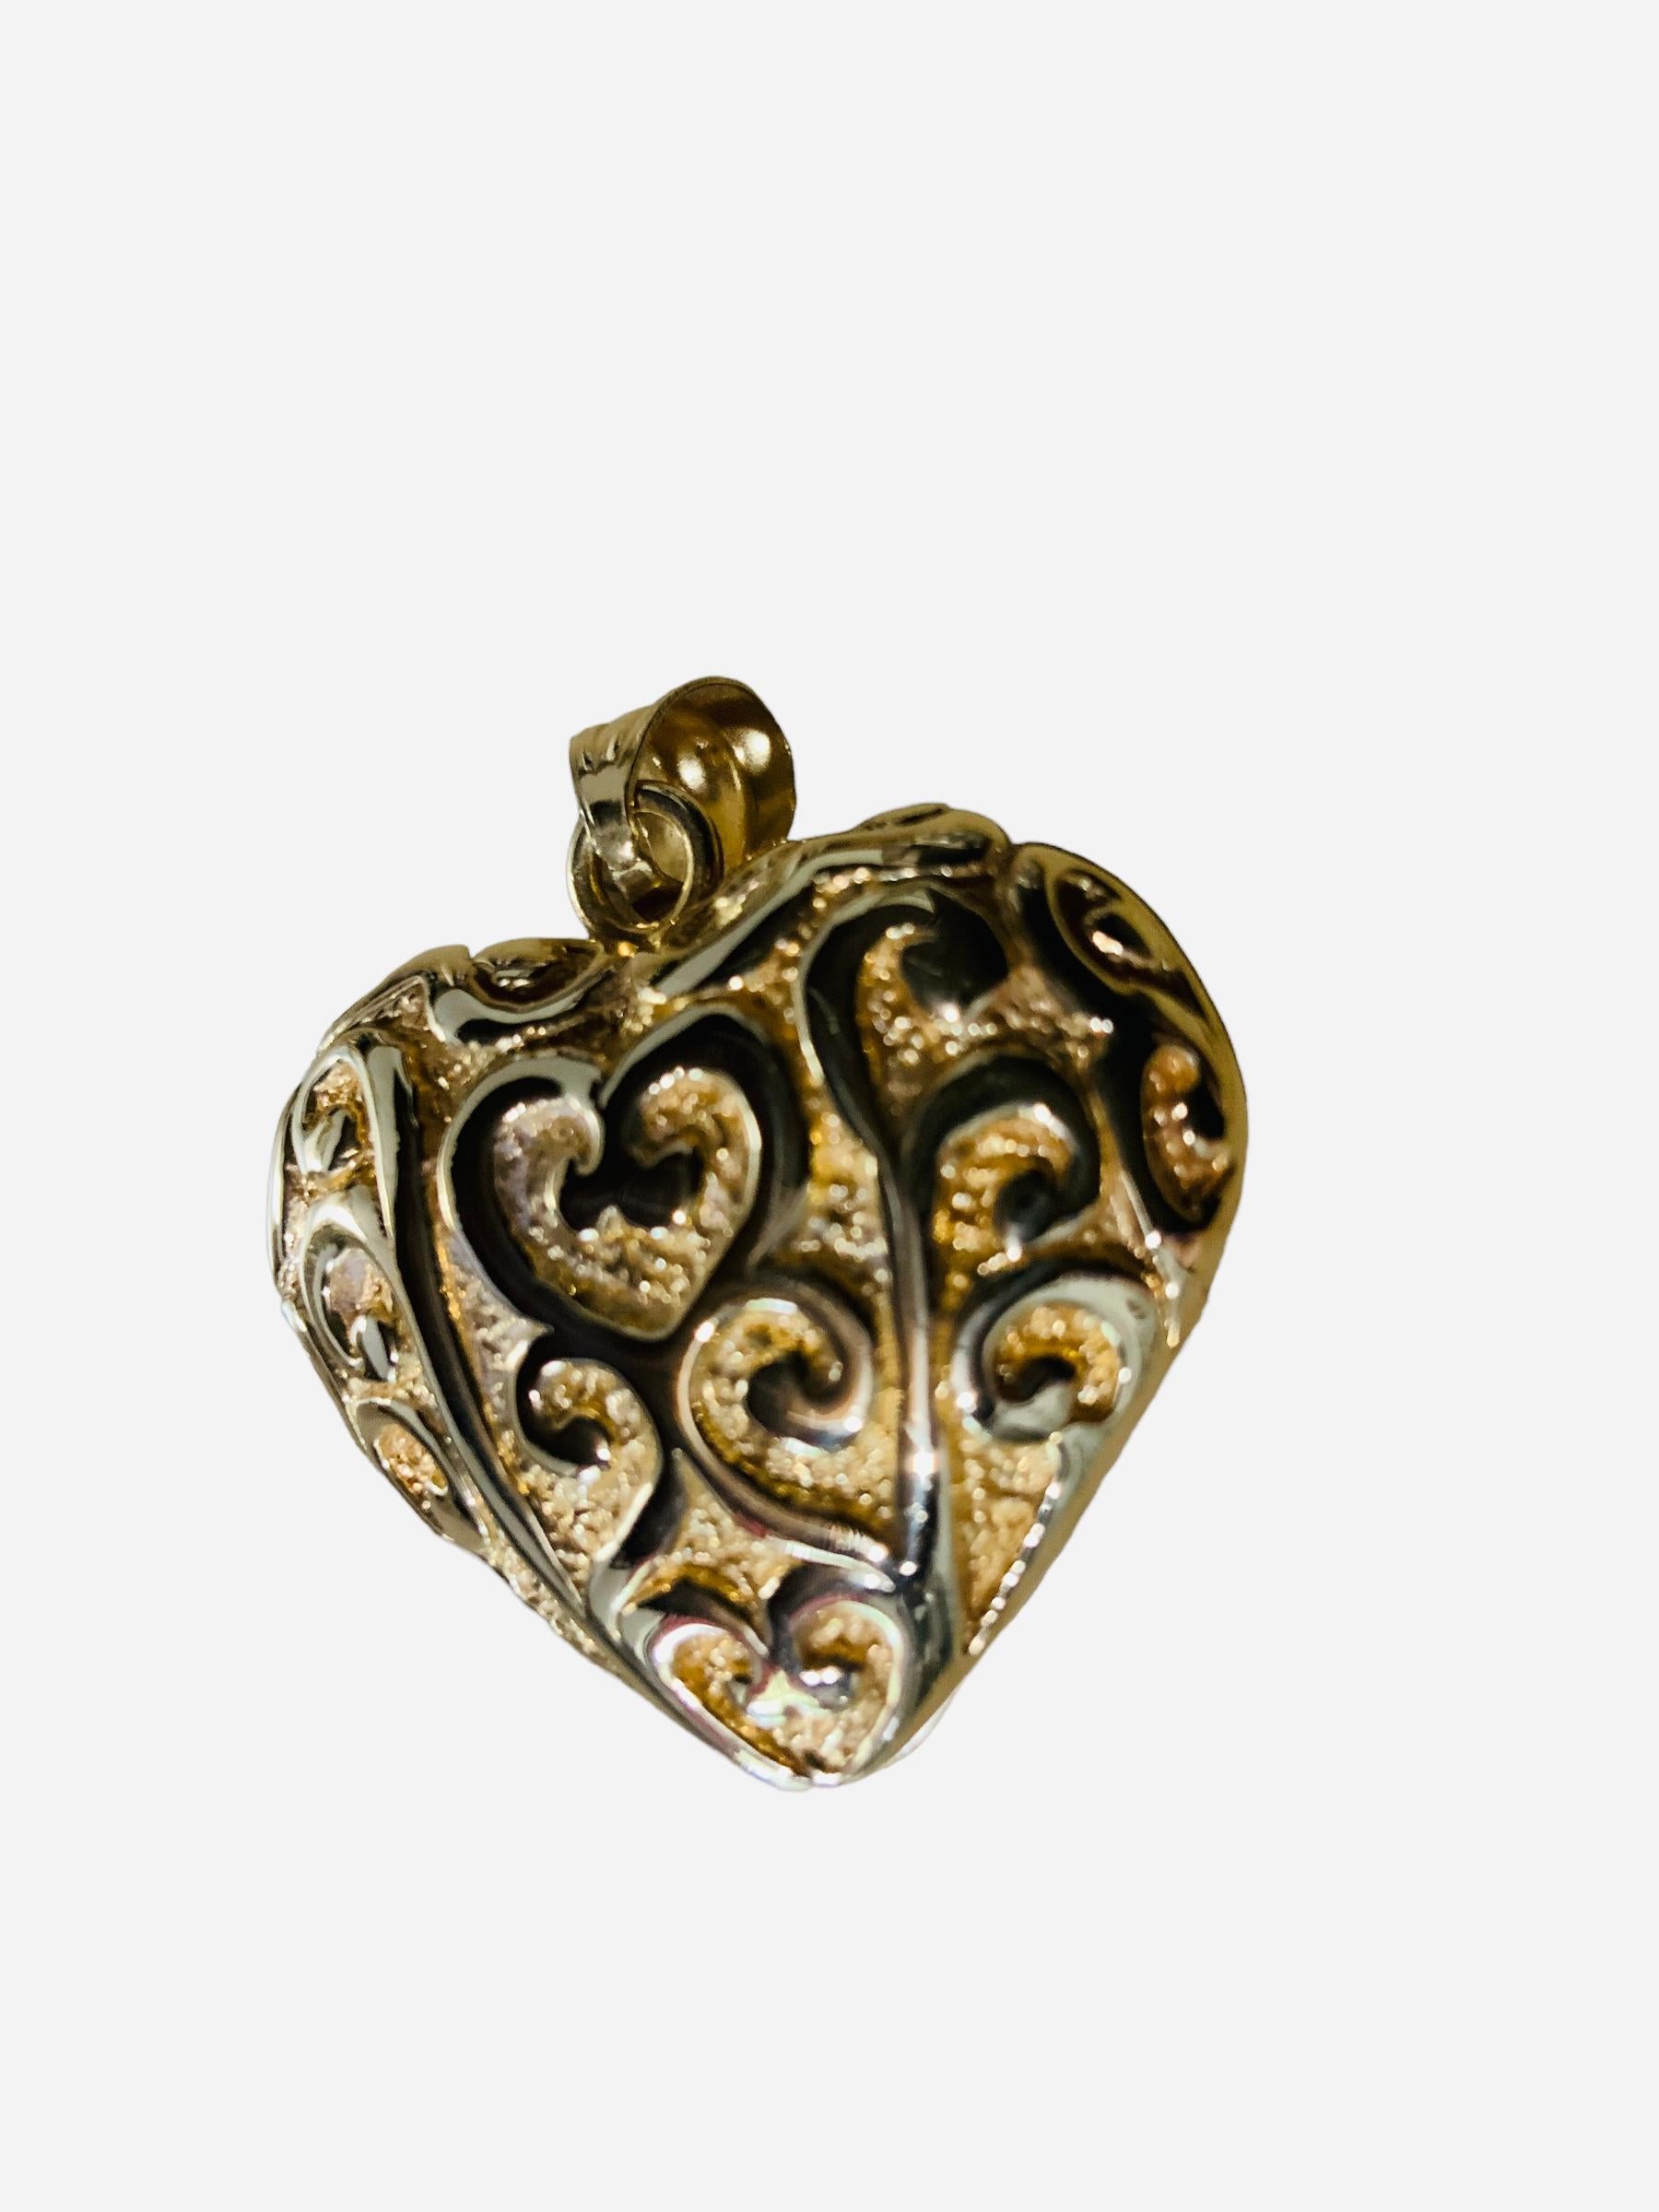 This is an 18K yellow gold heart pendant. It is hallmarked 750 in the loop and 18K, Italy and ZRW in the tip of the heart. The heart pendant is adorned with an embossed design of hearts in the center and several scrolls that comes around them.